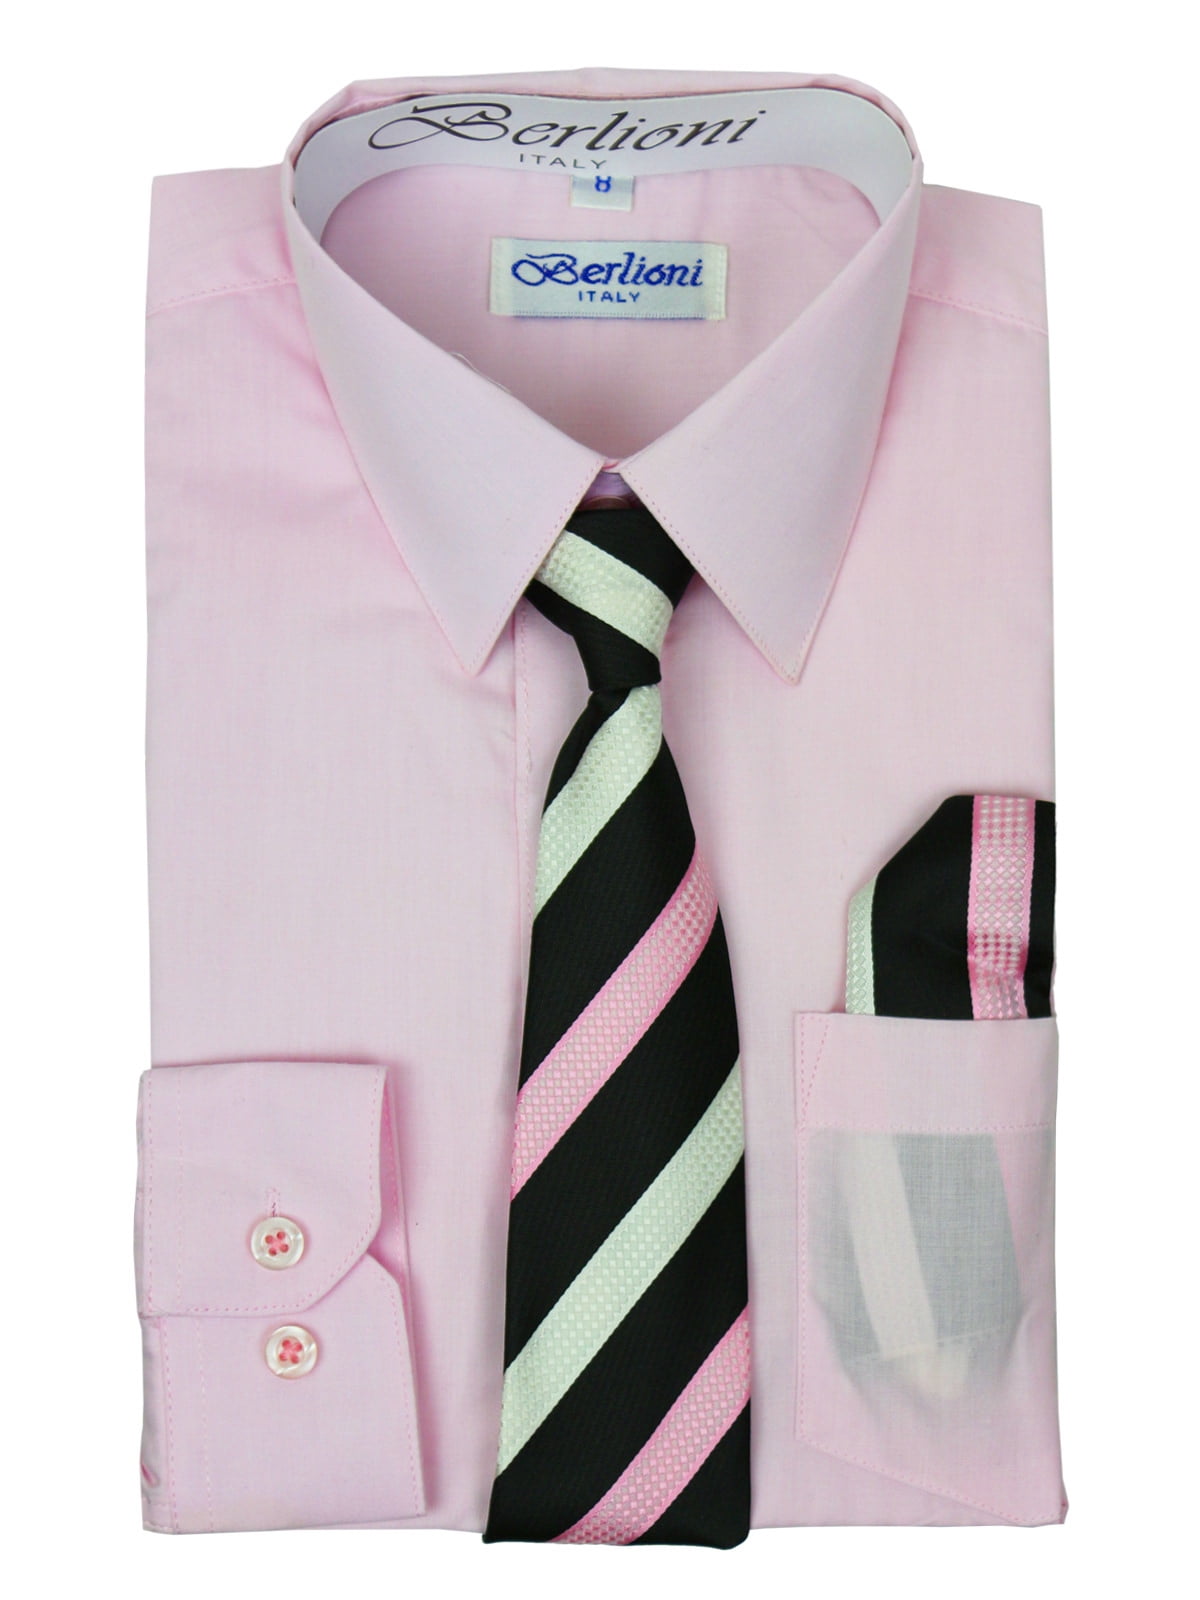 Boys Dress shirt and tie combo set by Berlioni Italy 19 colors sizes 2-14 